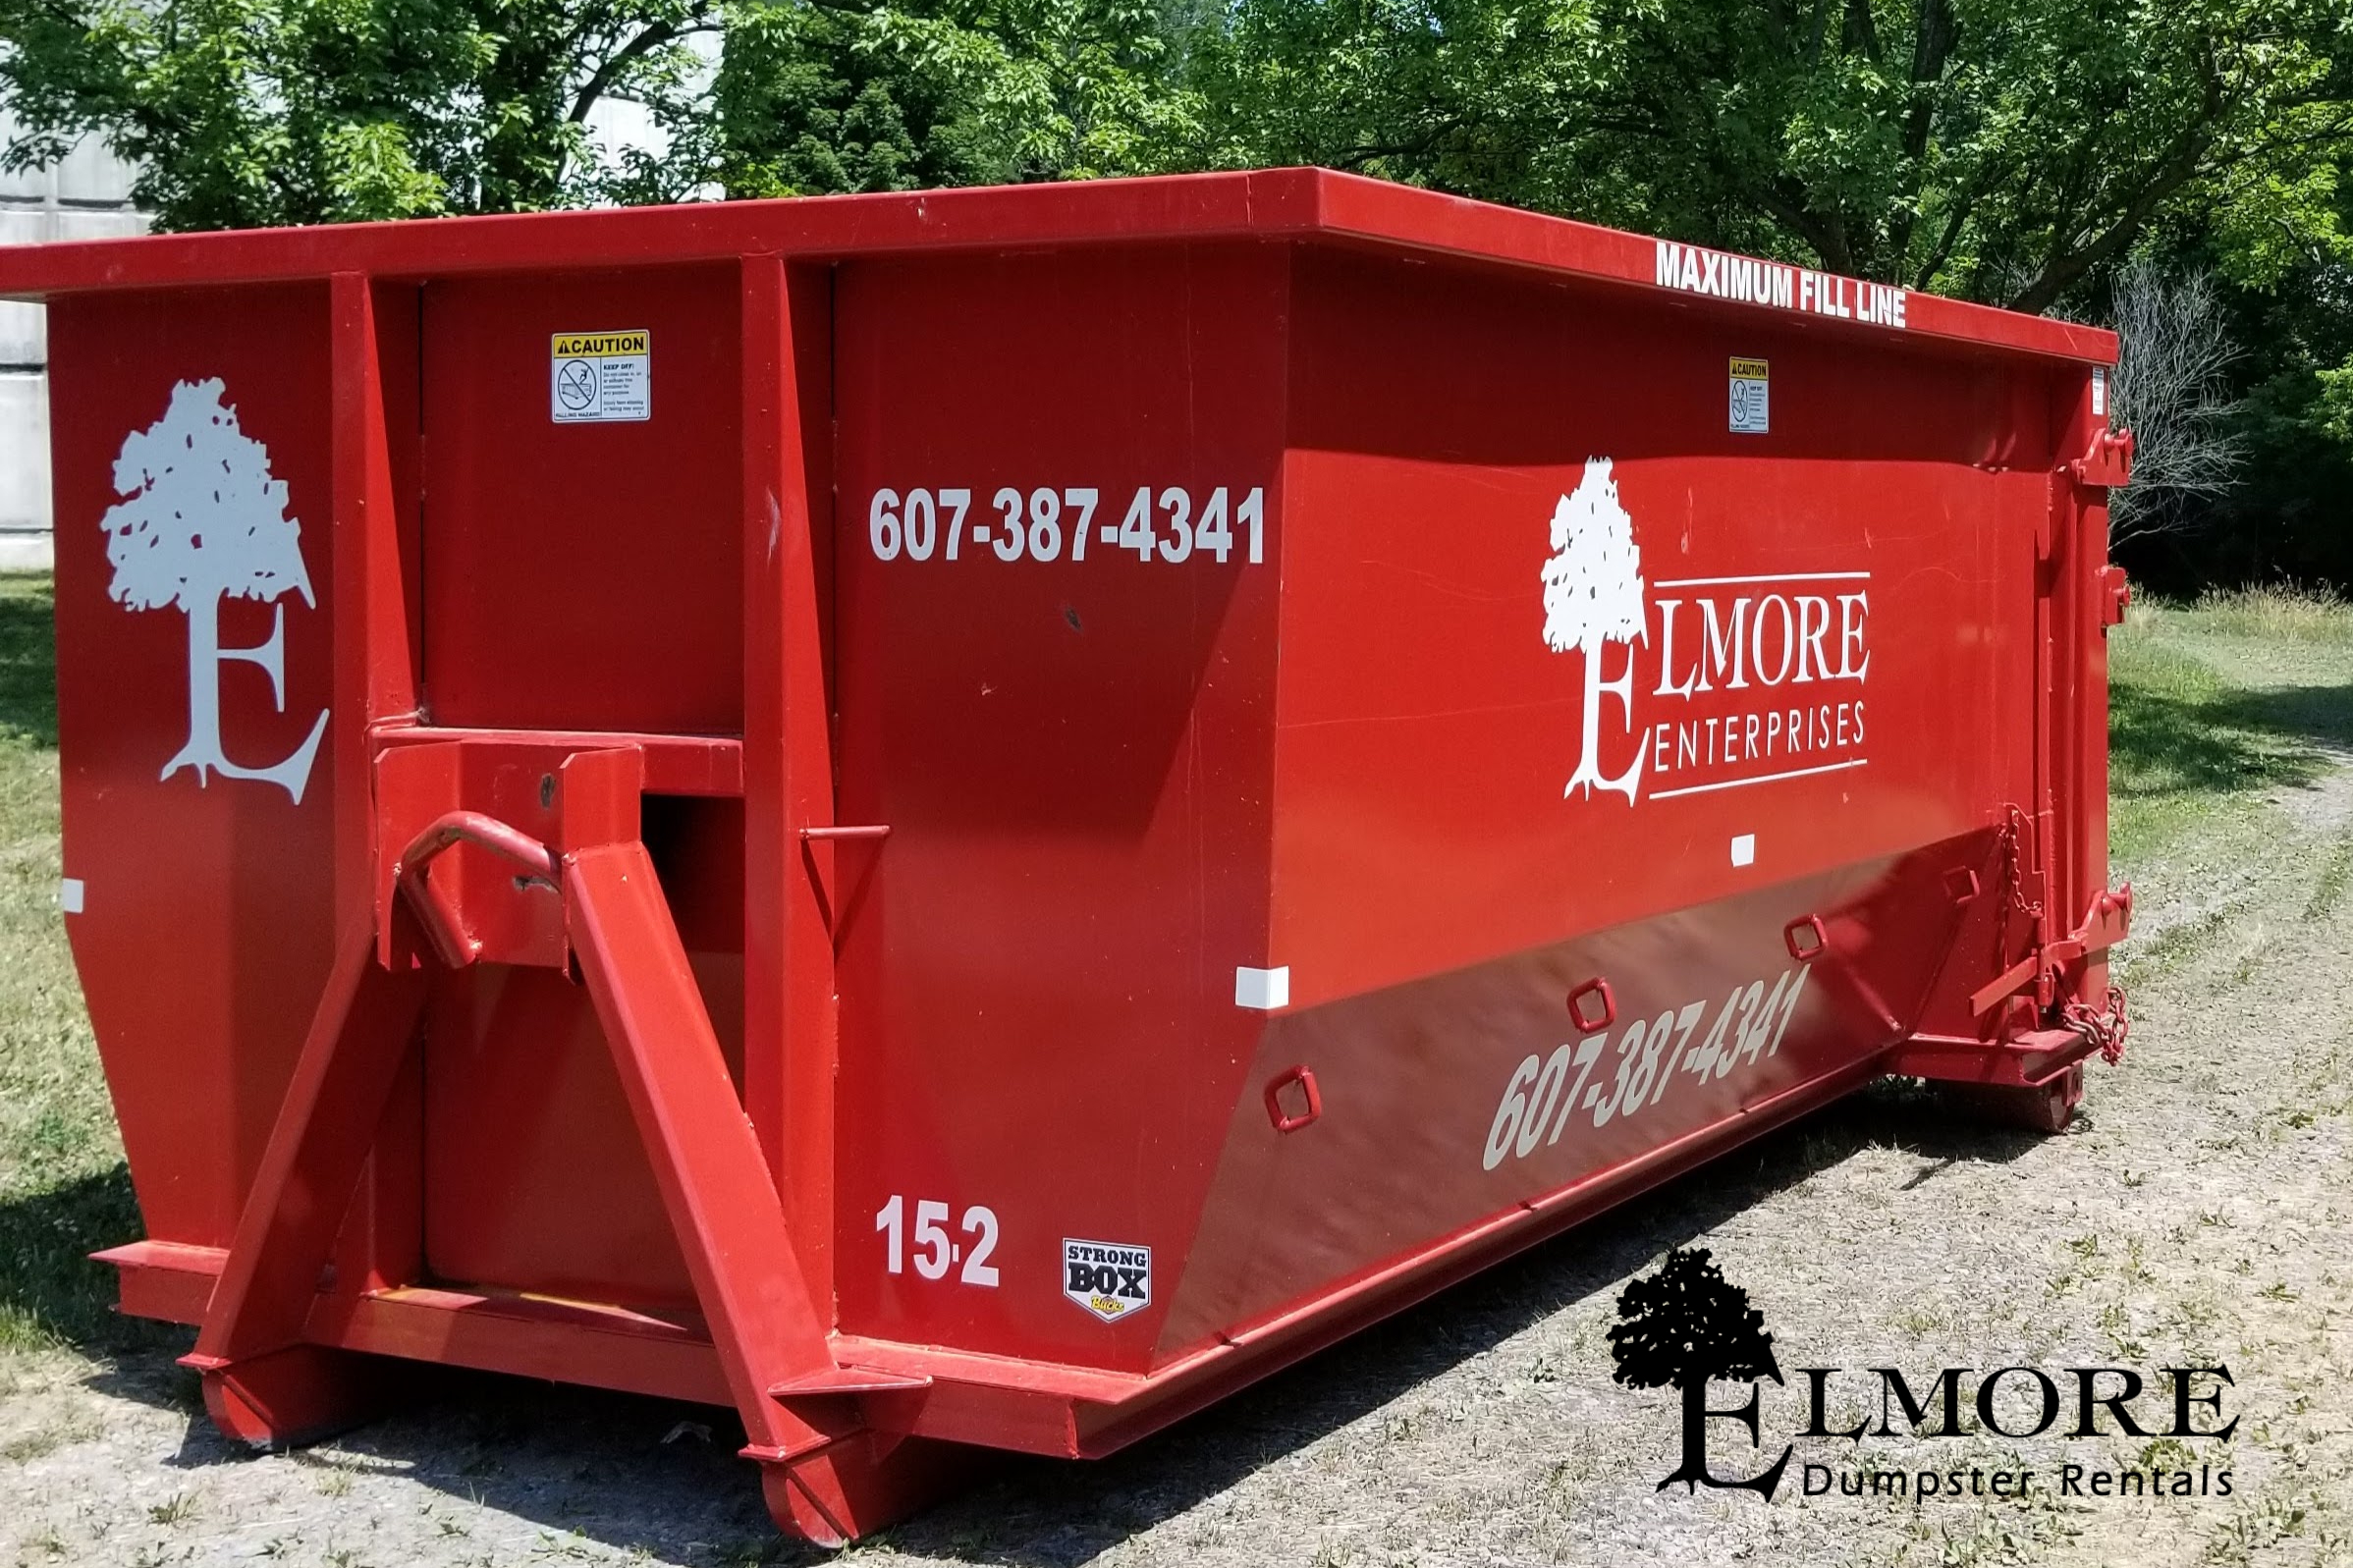 Reliable Residential Dumpster Rental Elmore Dumpster Rentals Horseheads NY